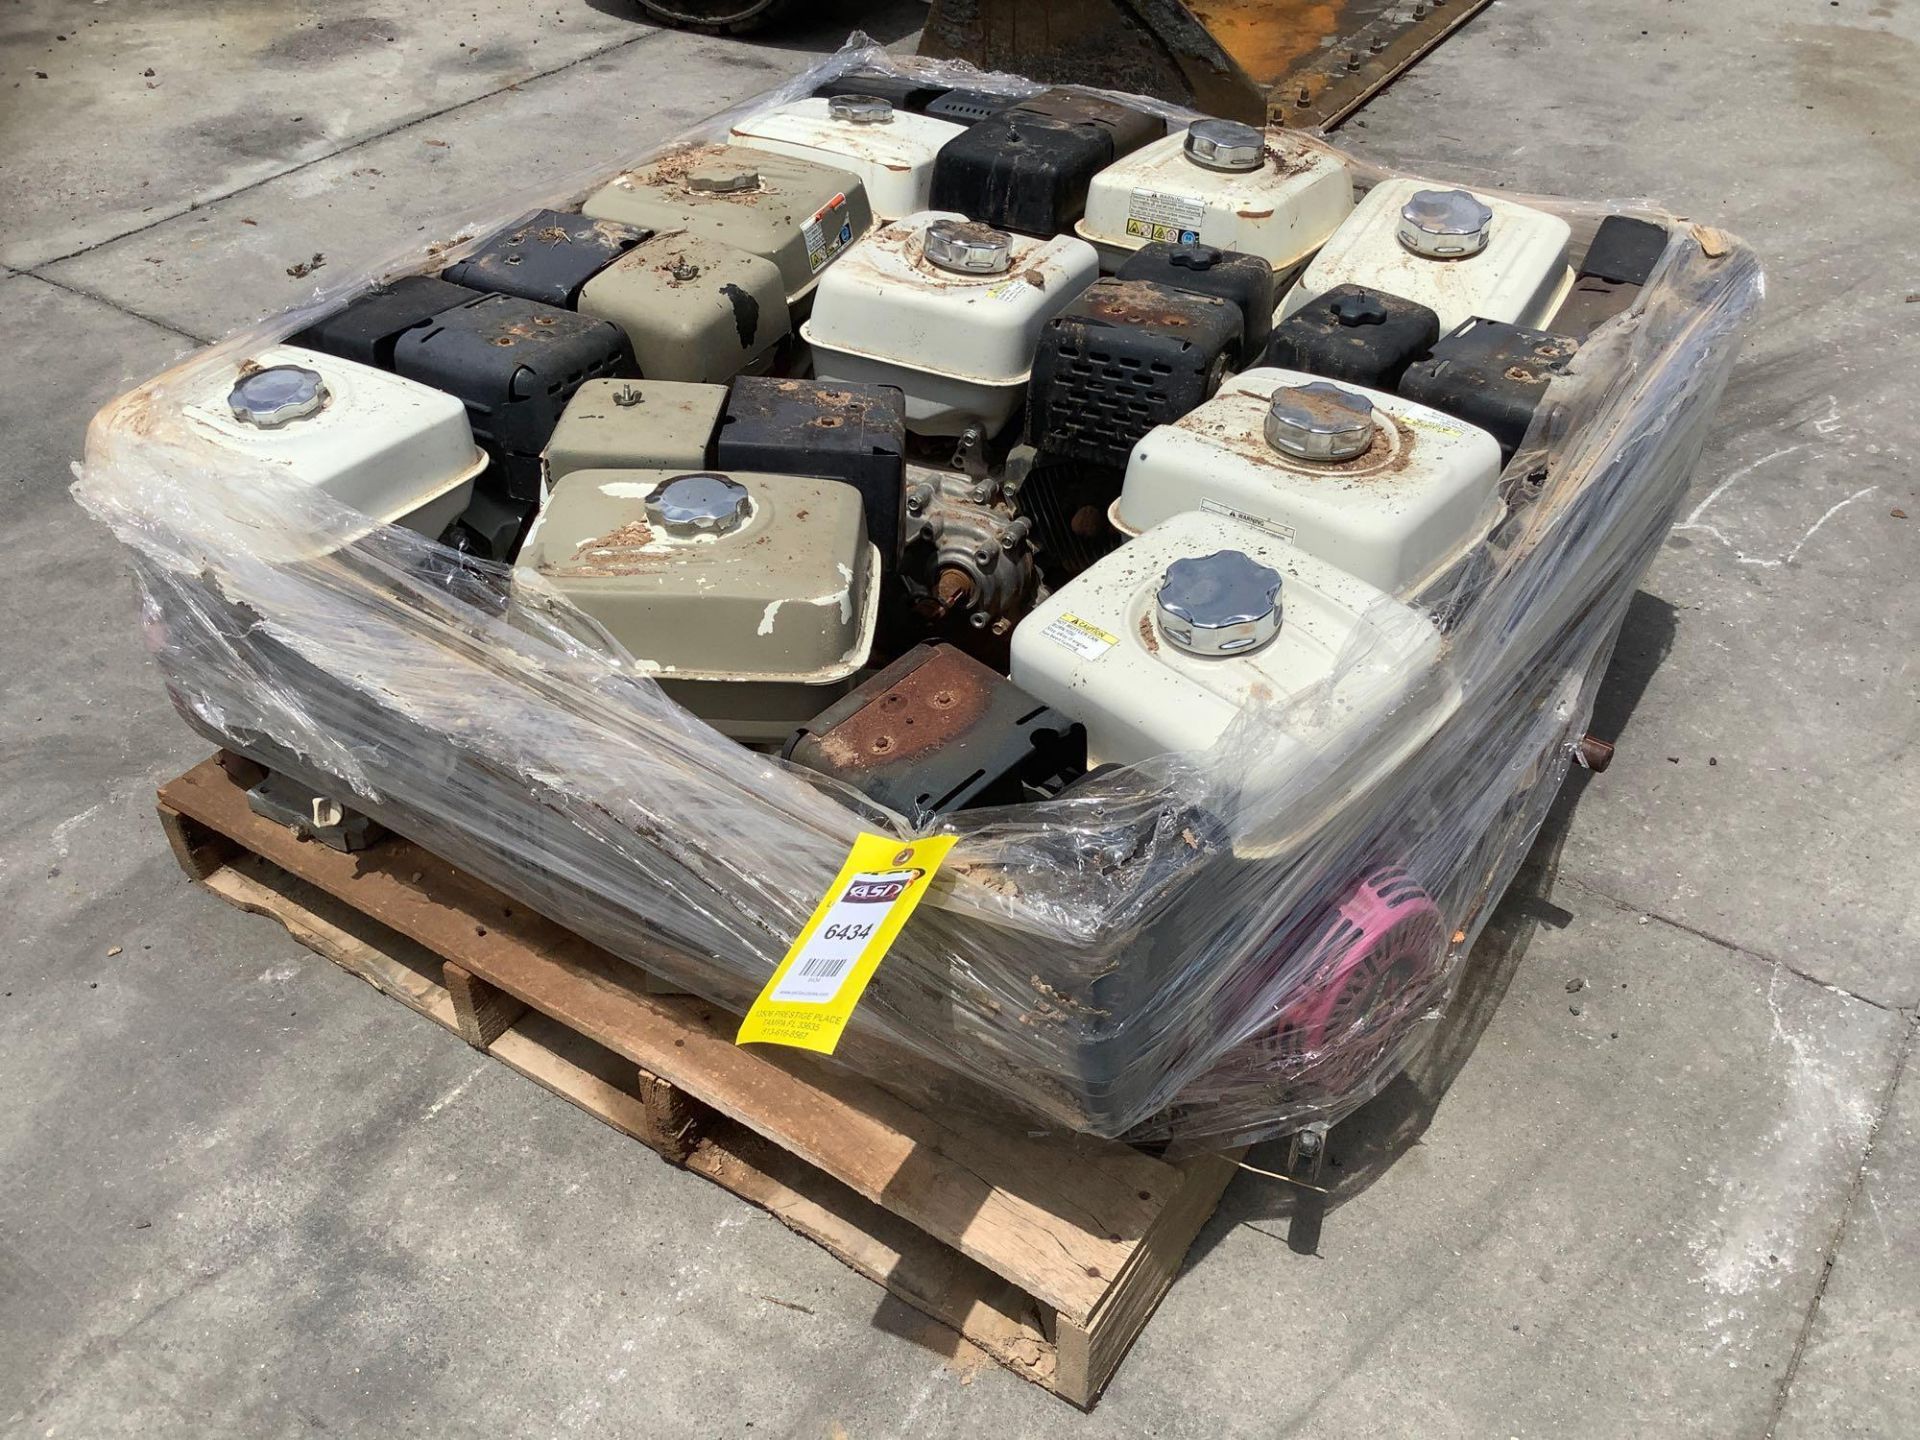 PALLET OF GAS HONDA GX 240 ENGINE , 8 HP, REMOVED FROM WORK SITE DOES RUN ALTHOUGH UNABLE TO GUARANT